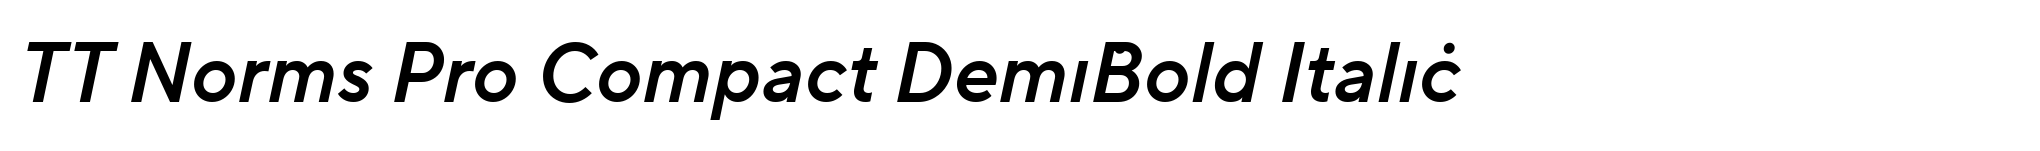 TT Norms Pro Compact DemiBold Italic image